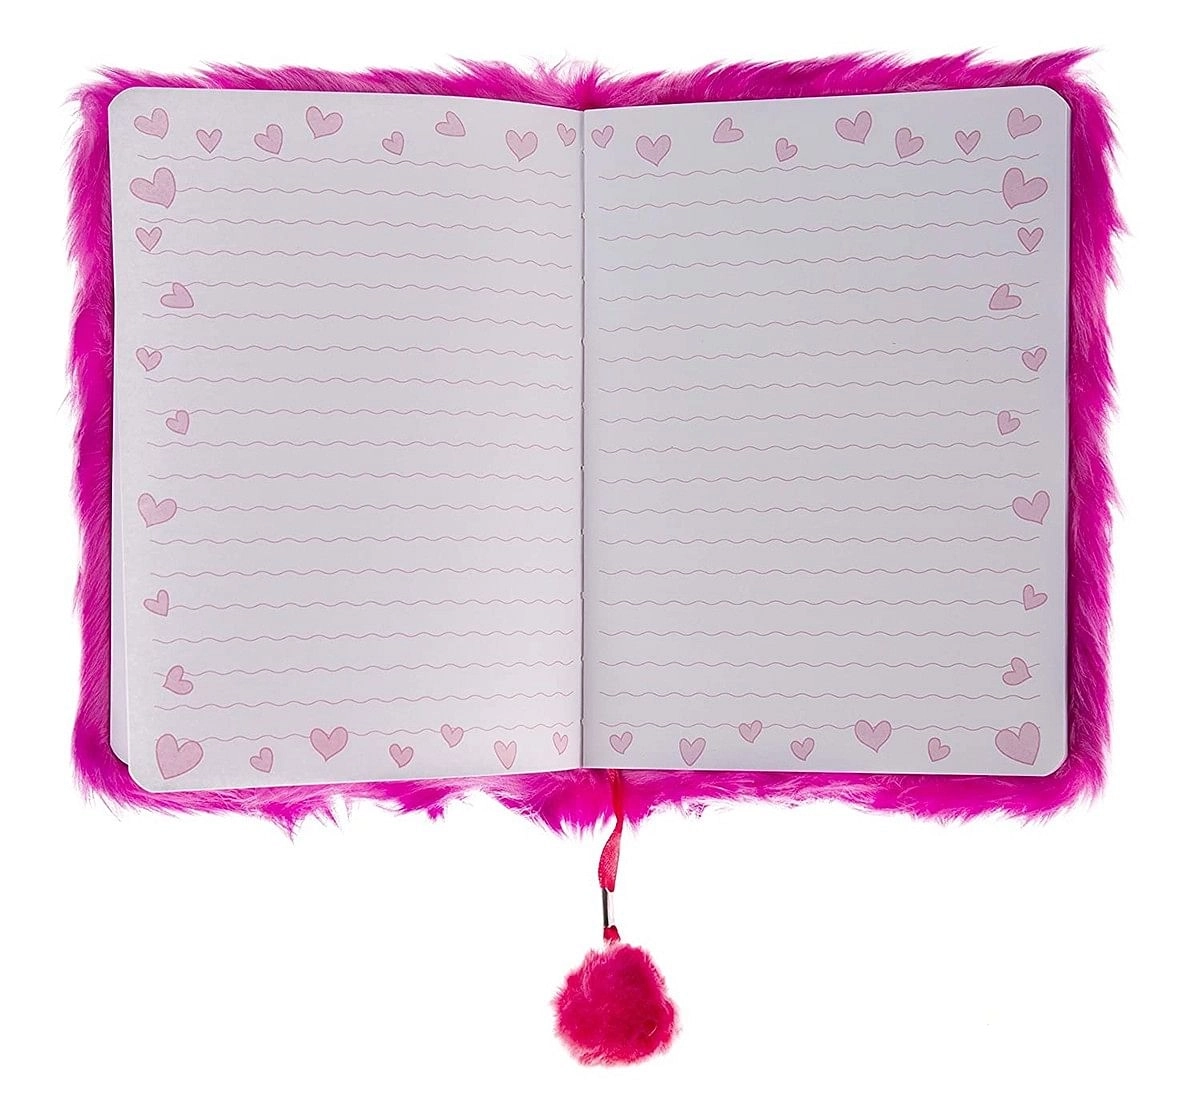 Mirada  Fluffy Plush Study & Desk Accessories for Kids age 3Y+ (Pink)